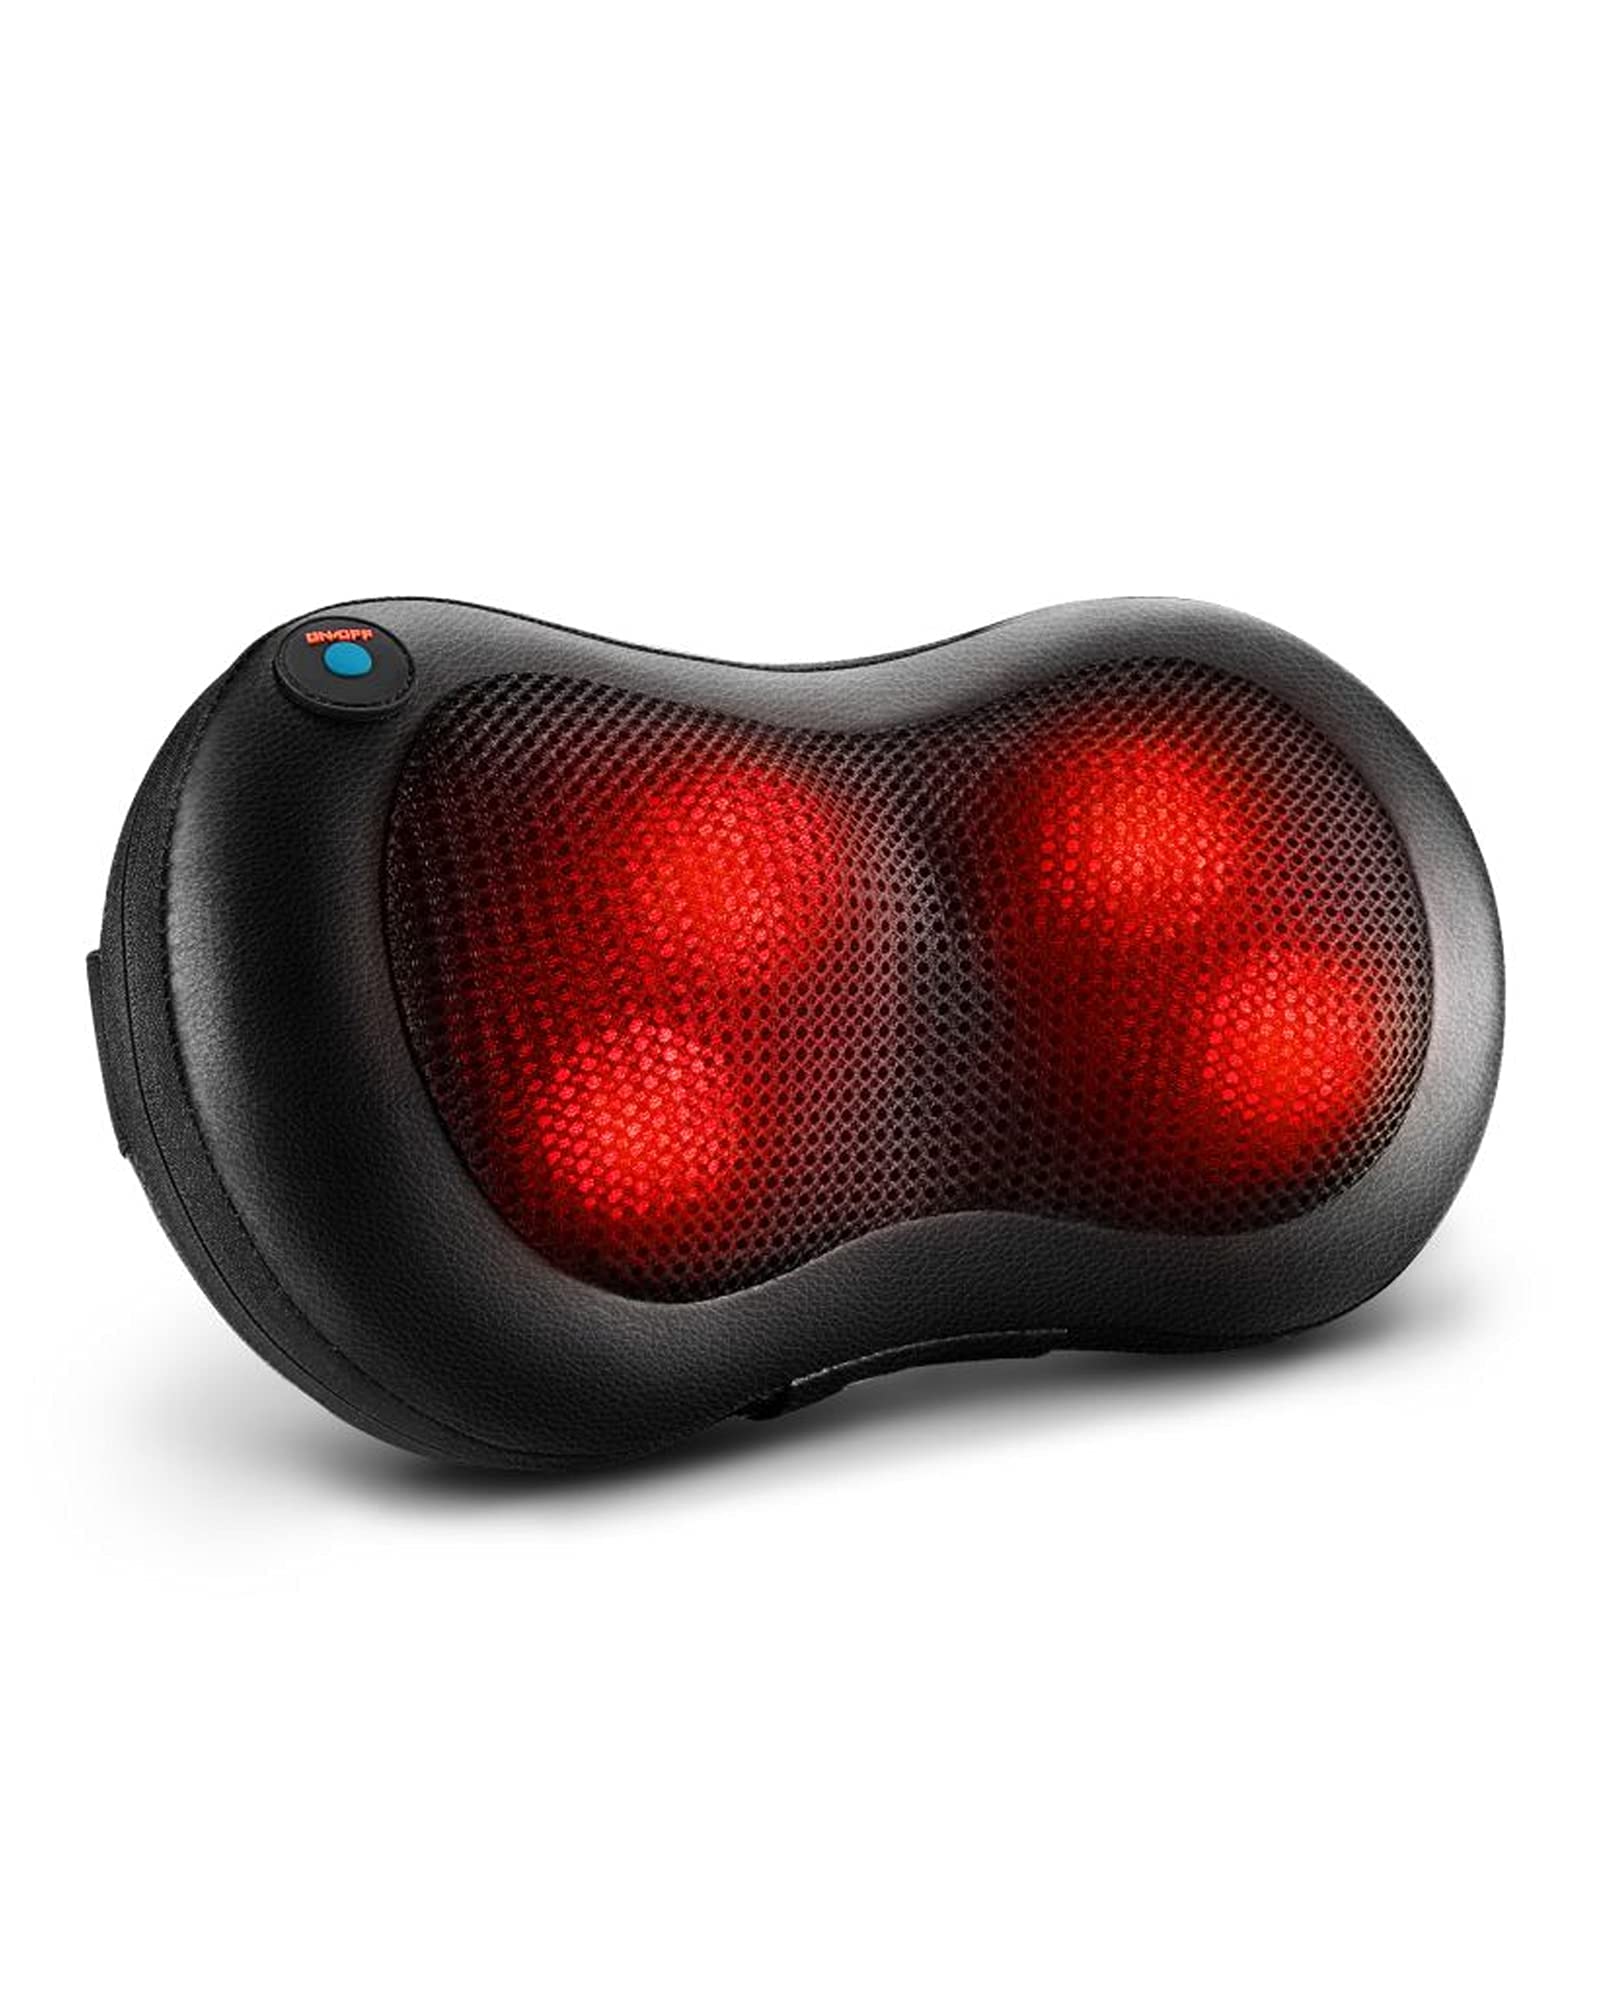 Naipo Shiatsu Back and Neck Massager with Heat Deep Kneading Massage for  Neck, Back, Shoulder, Foot and Legs, Use at Home, Car, Office 